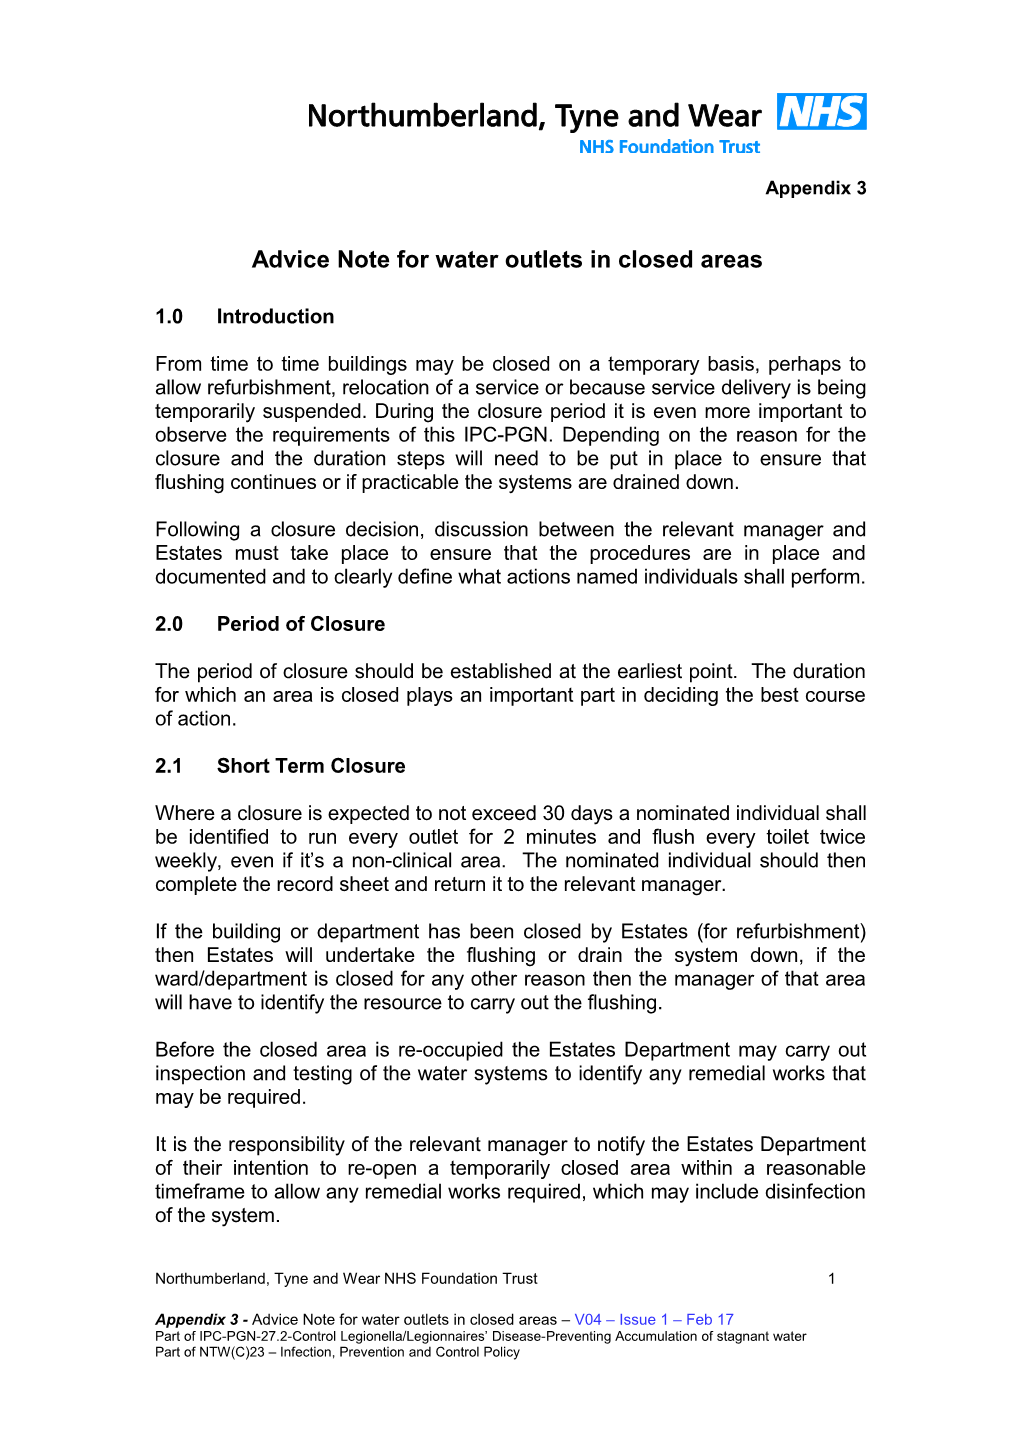 Advice Note for Water Outlets in Closed Areas